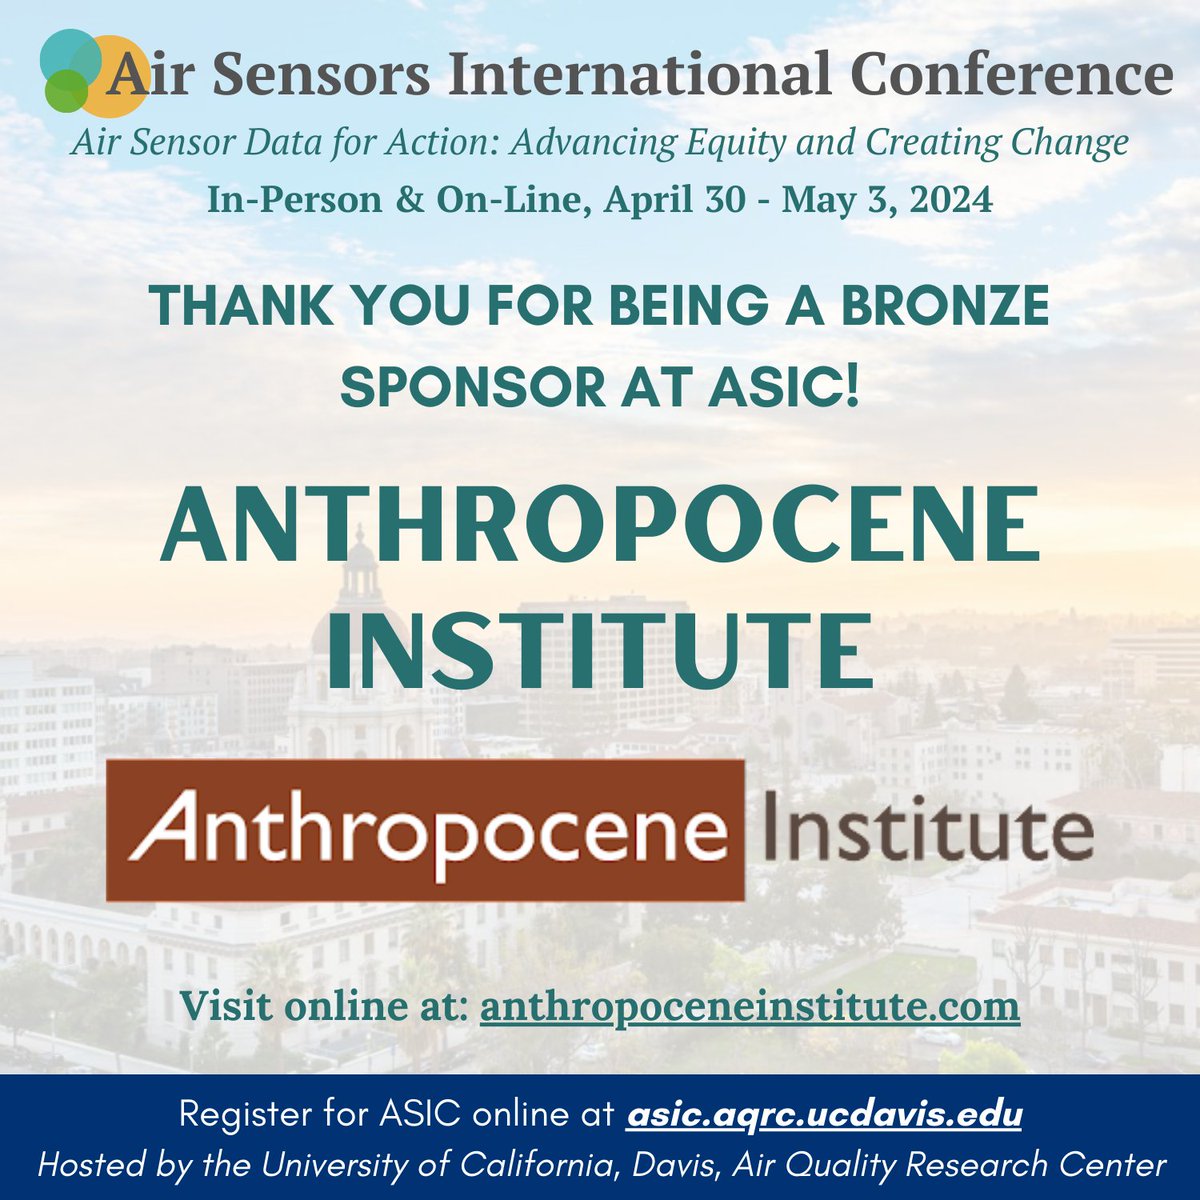 Thank you to the Anthropocene Institute for being a bronze sponsor at ASIC California 2024! Learn more about them at anthropoceneinstitute.com @anthrop_inst #ASIC2024 #airquality #airsensors #lowcostsensors #communityscience #sustainability #renewableenergy